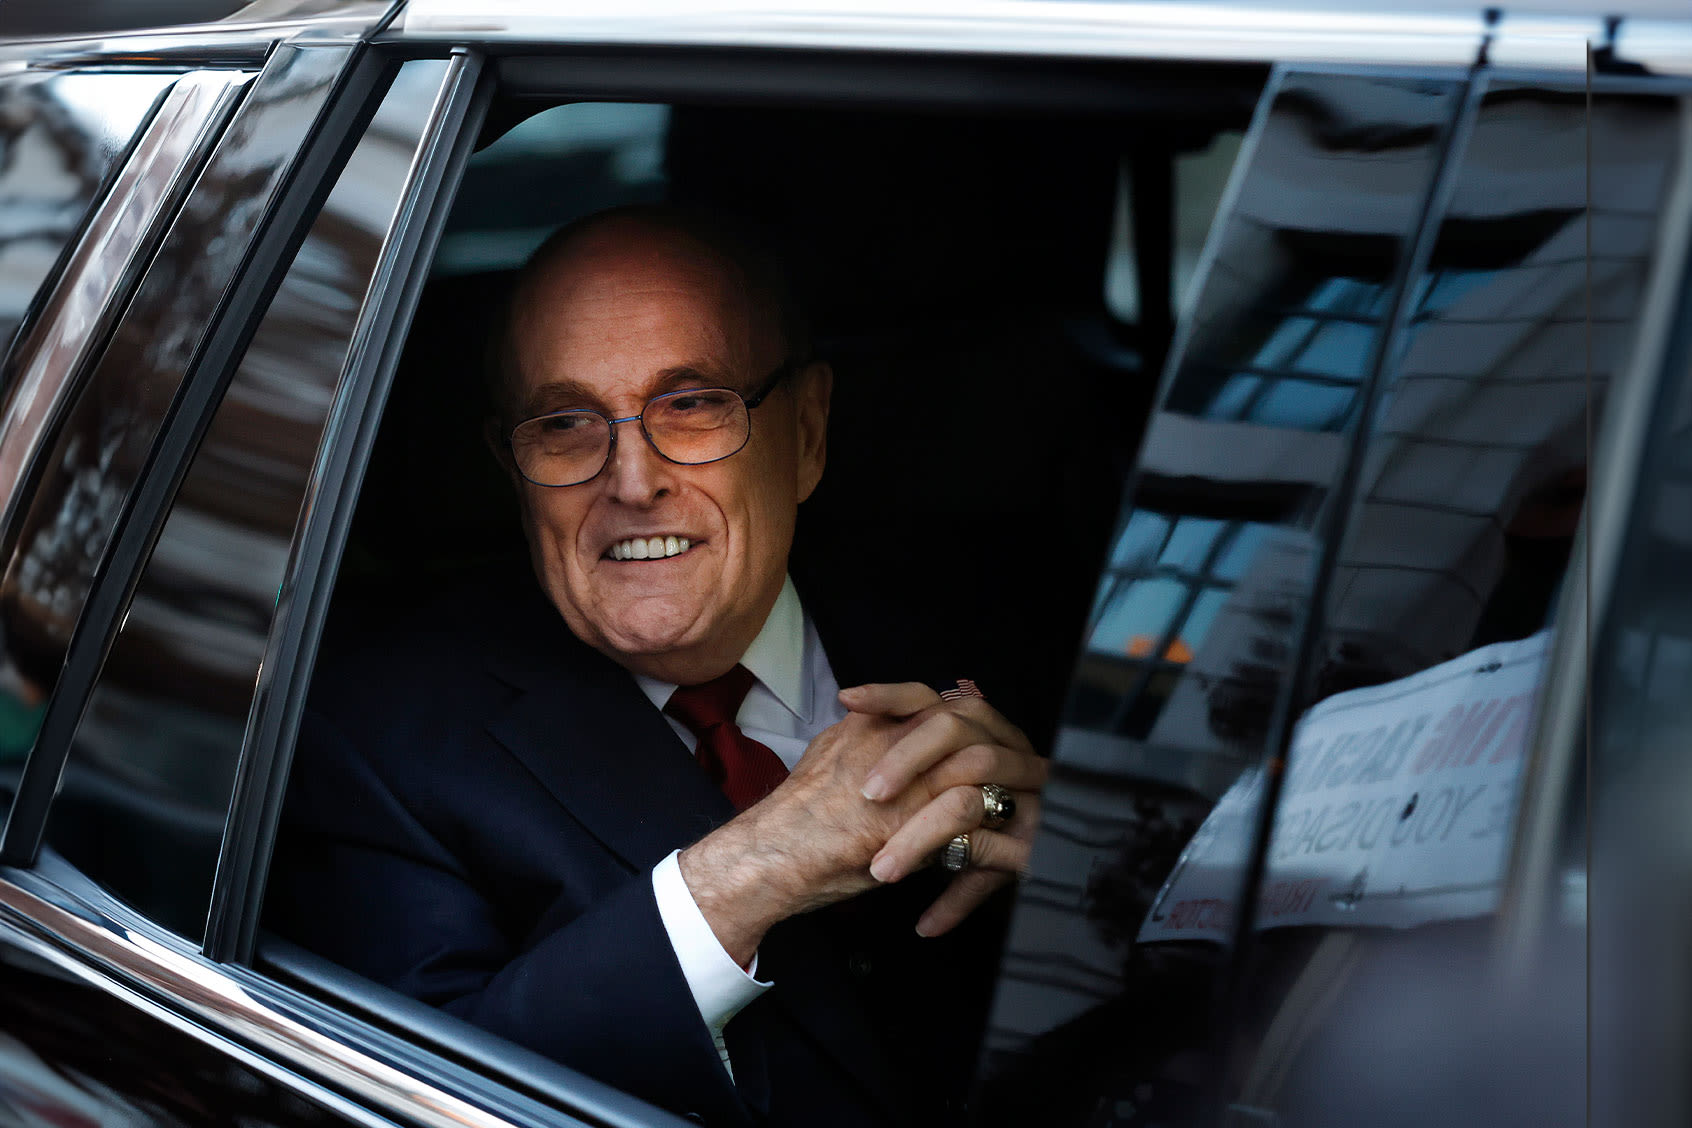 Amid ongoing legal troubles, Rudy Giuliani launches eponymous coffee brand